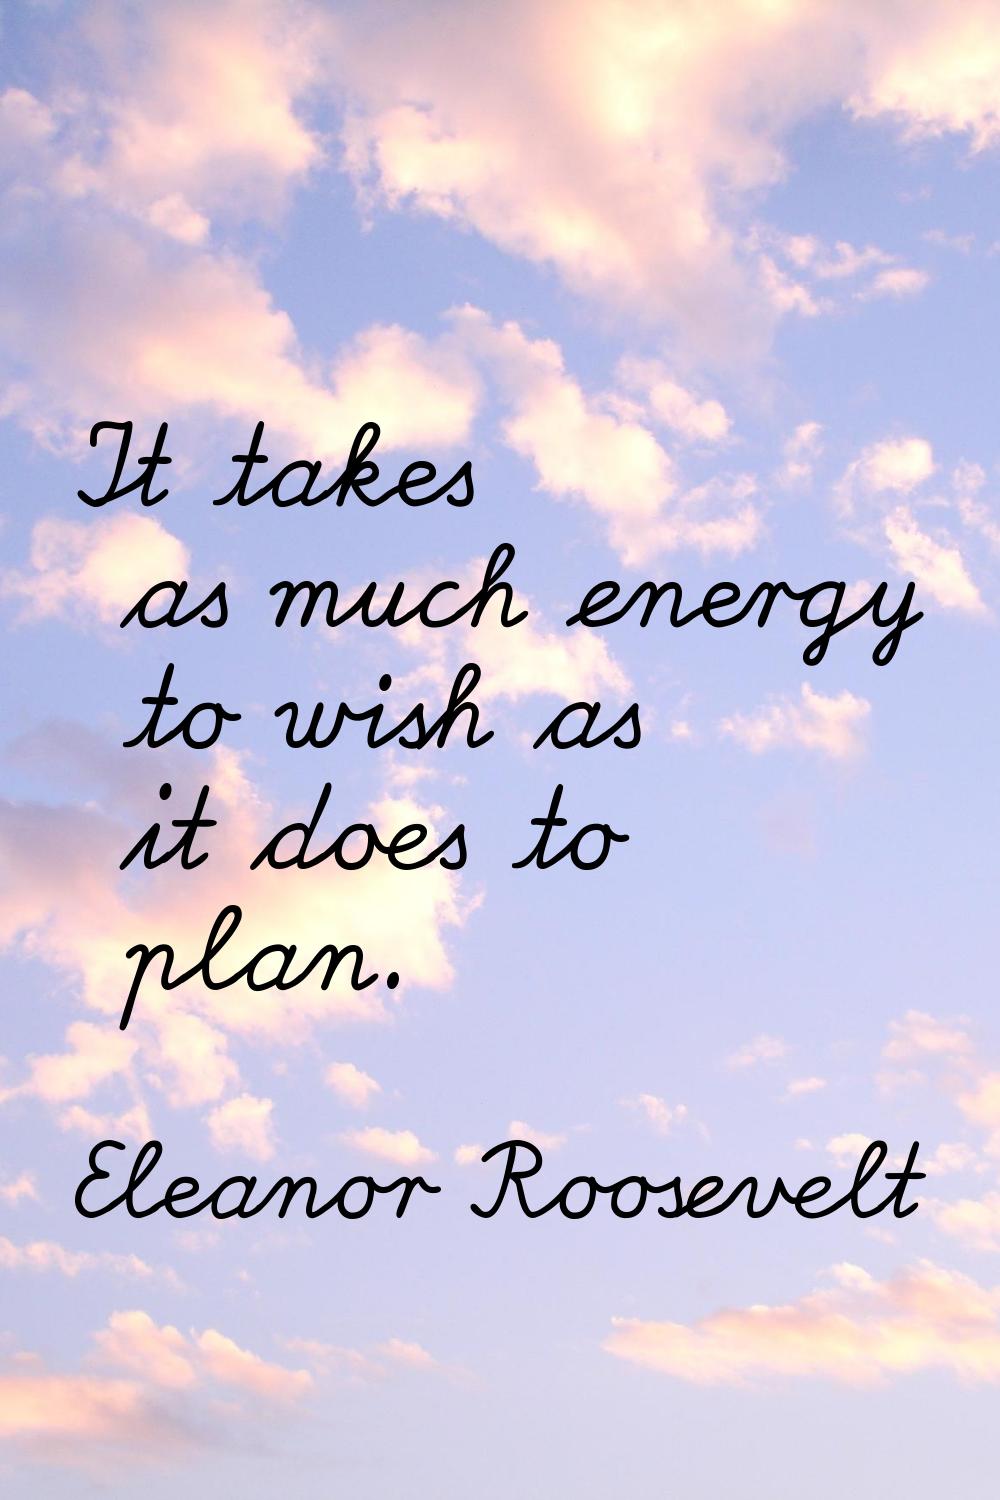 It takes as much energy to wish as it does to plan.